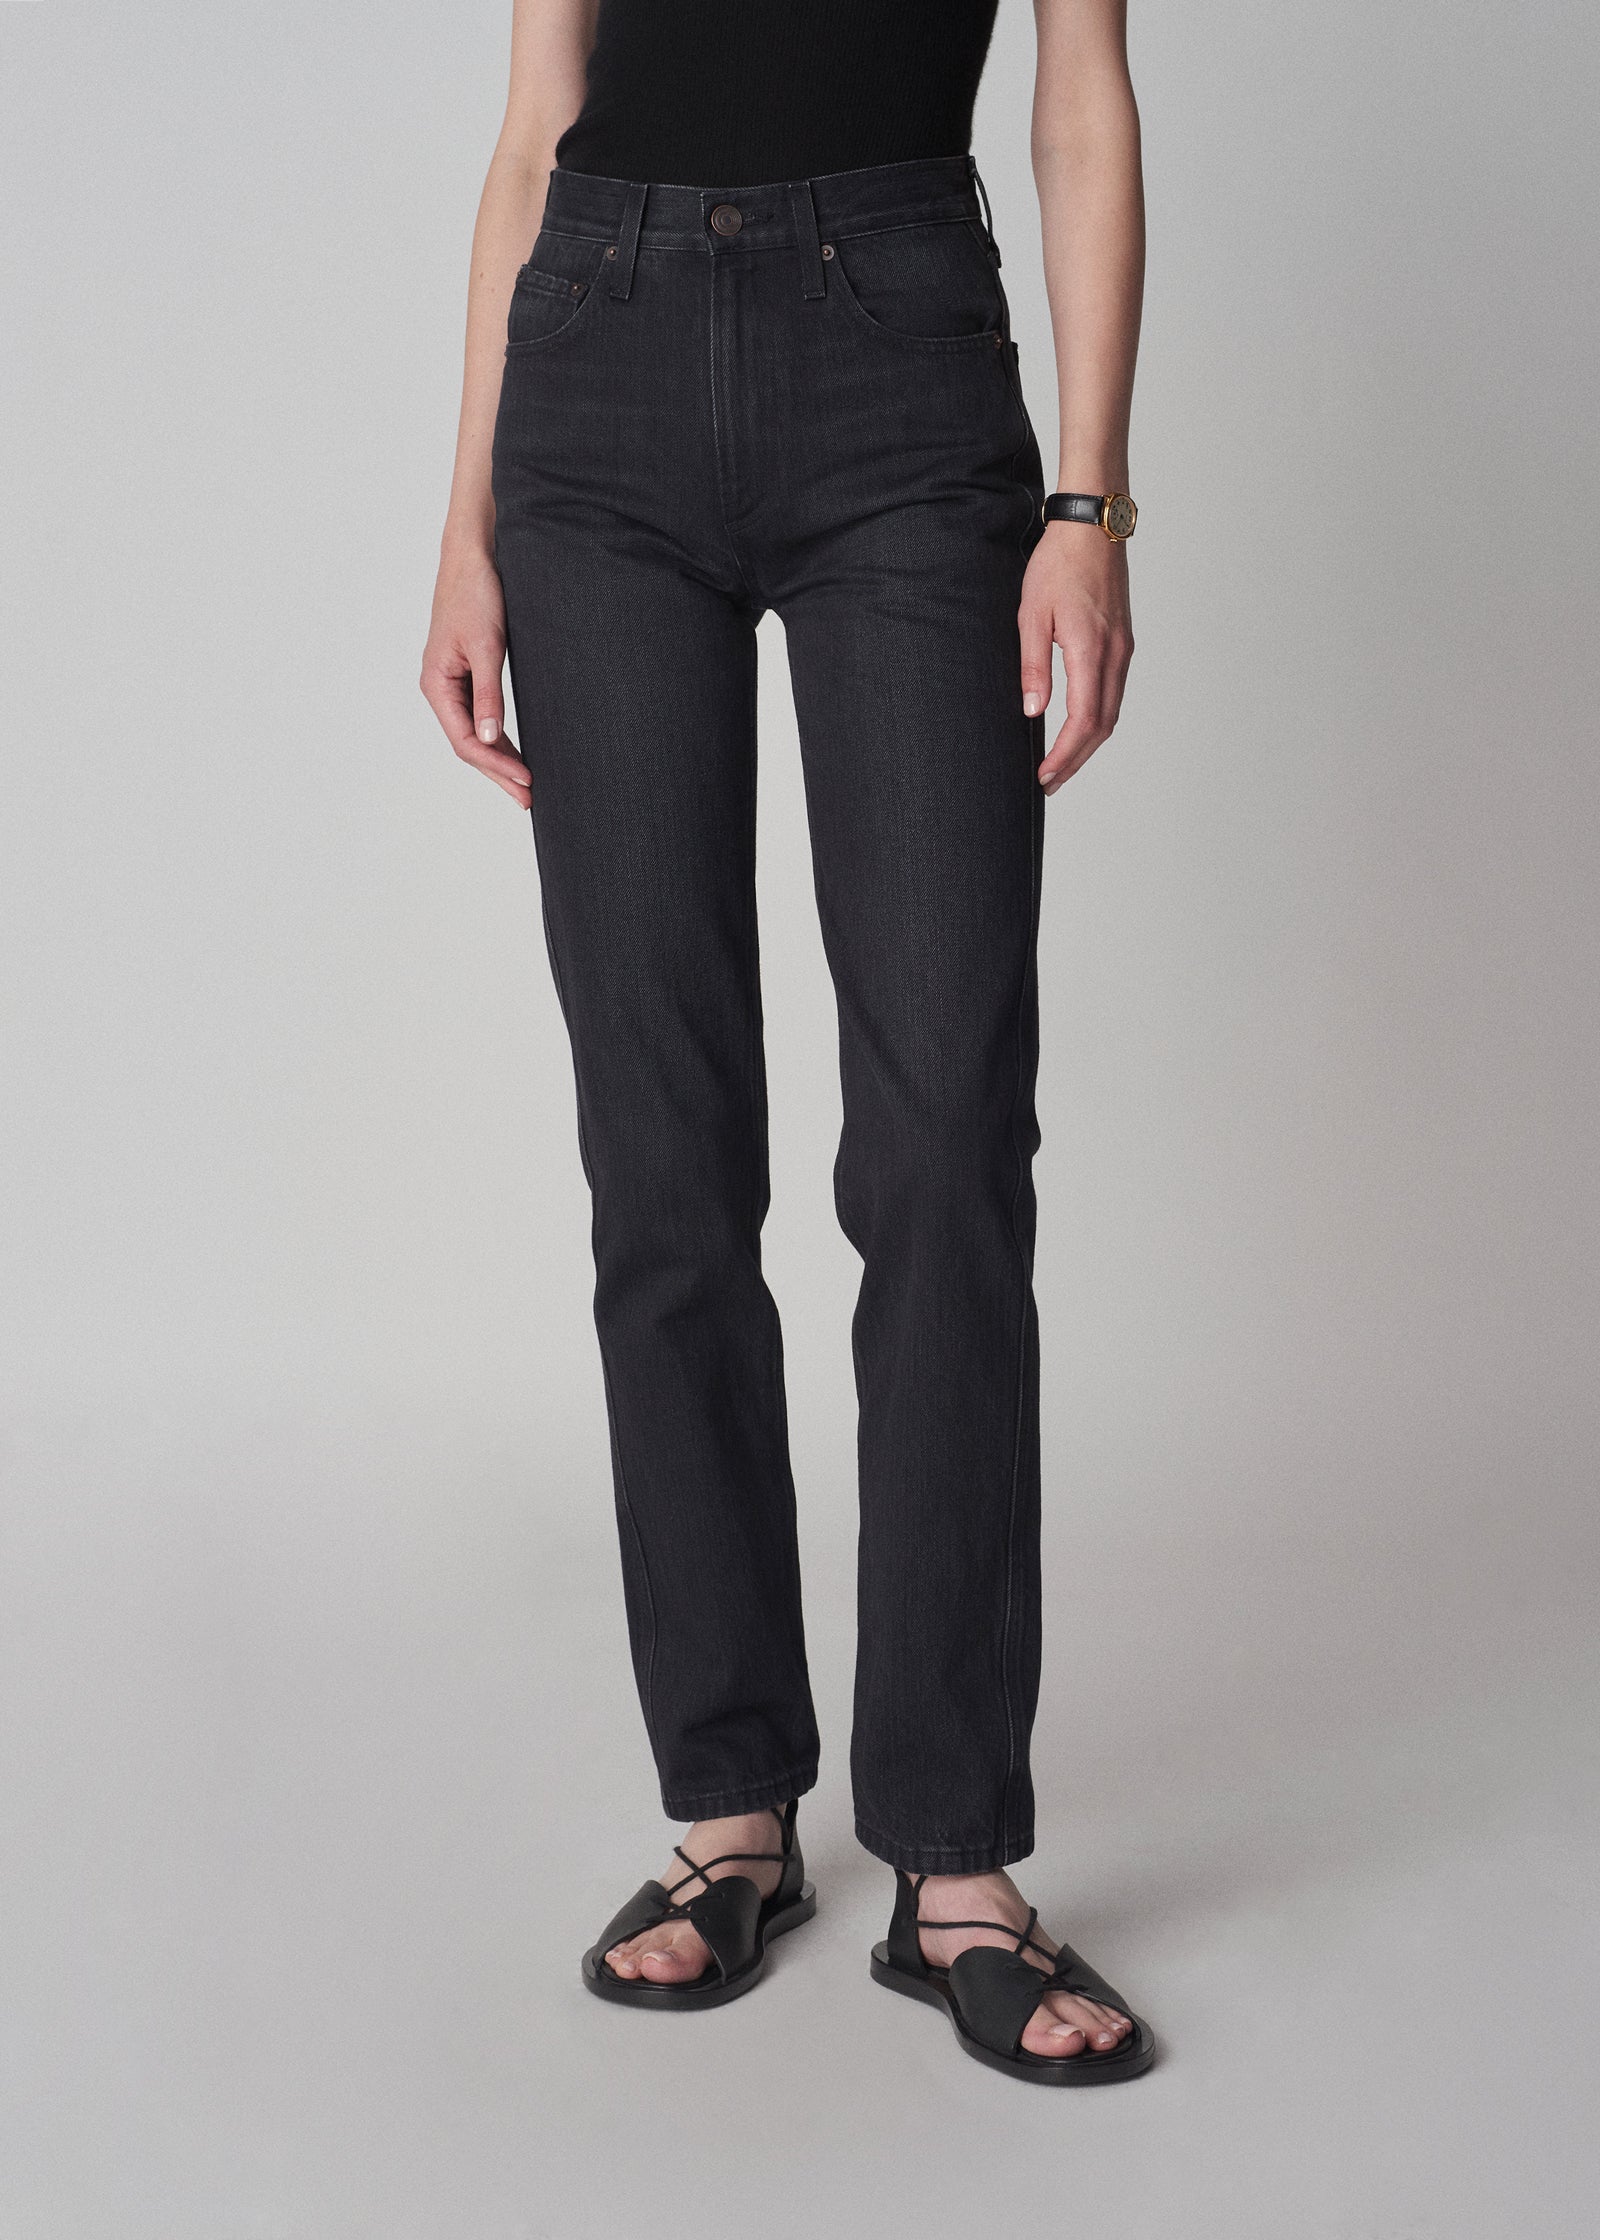 High Rise Denim - Washed Black - CO Collections